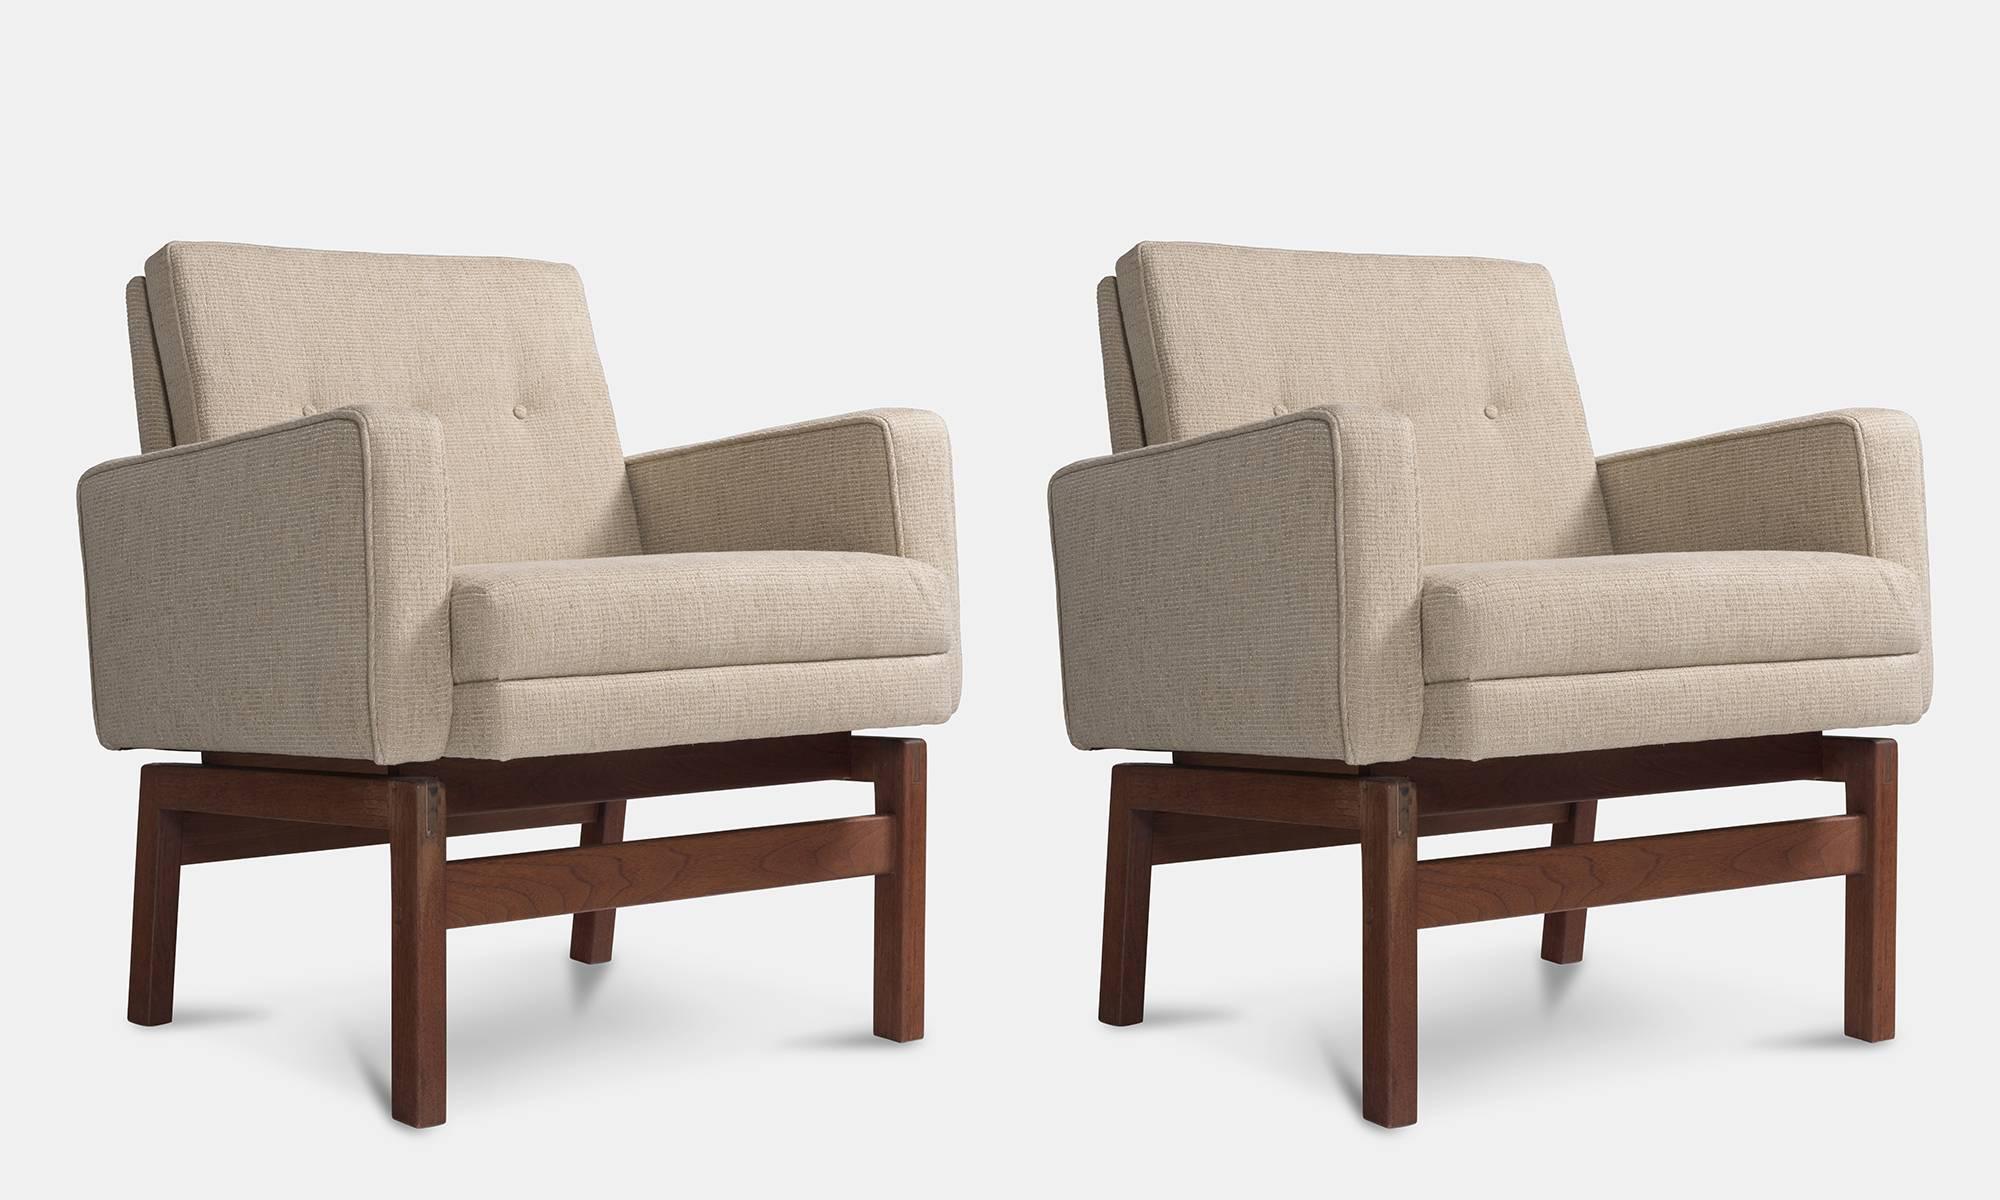 Jens Risom Modern lounge chairs, circa 1975.

Original blended cotton and felt upholstery with stained walnut legs. In great condition.

  